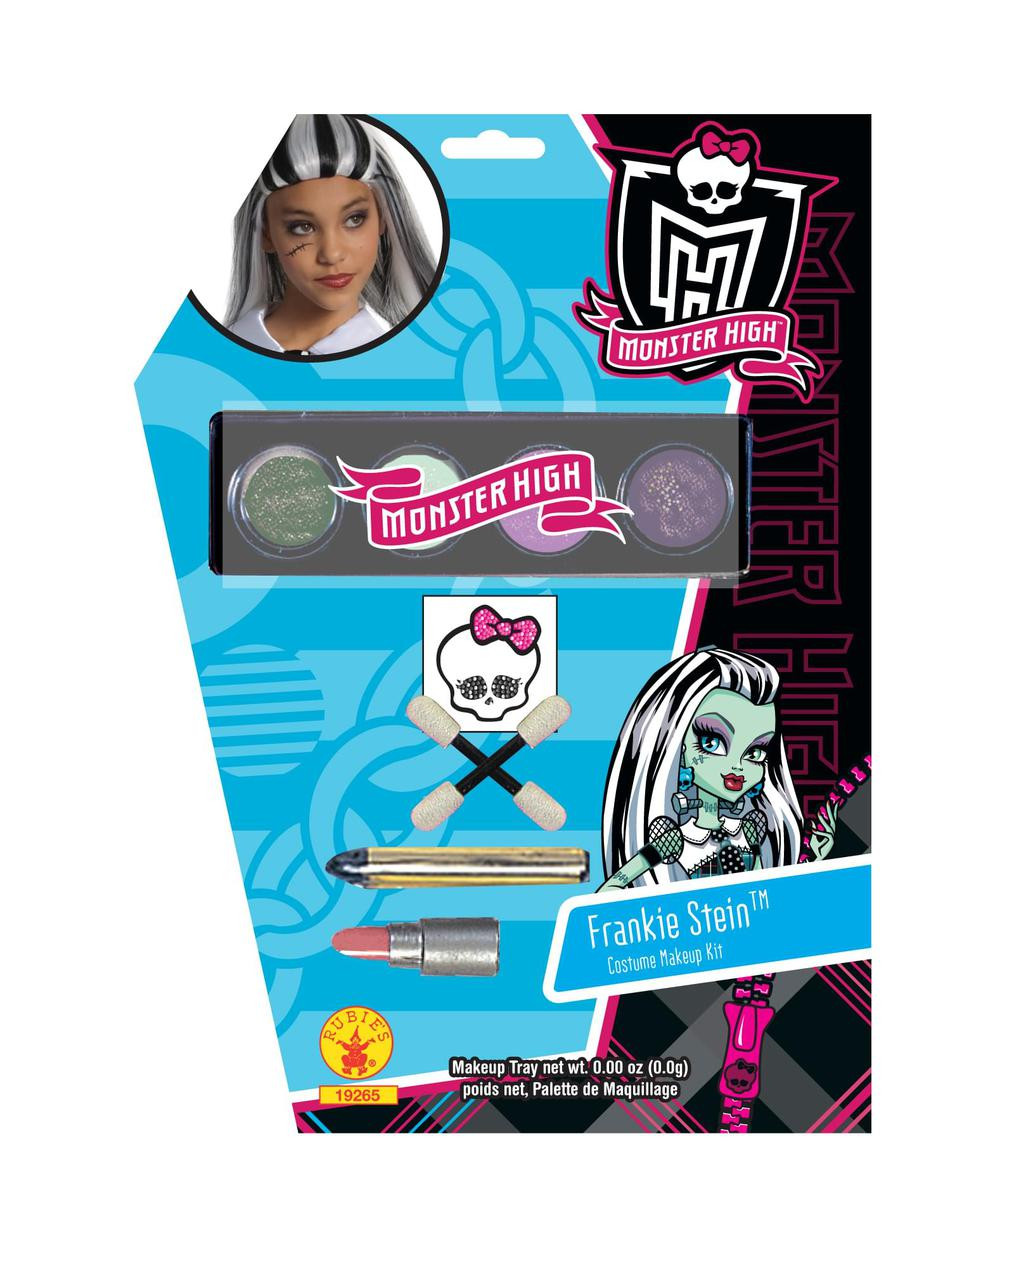 Monster High Frankie Stein Makeup Kit Child Monster makeup tutorials emma has done so far at the time this video was posted: the party works